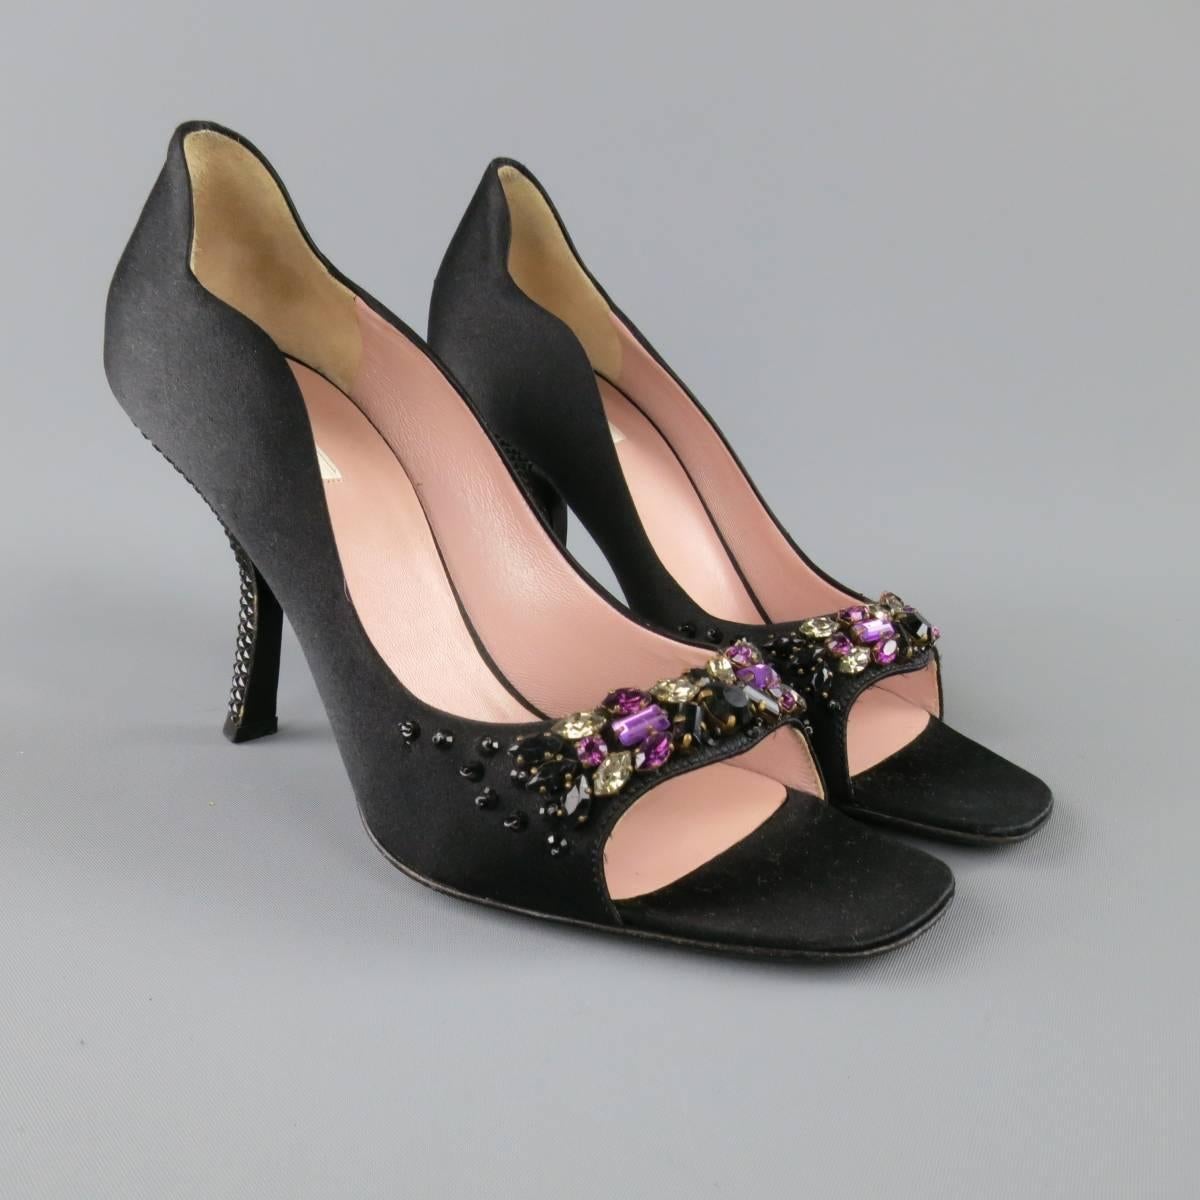 These fabulous PRADA pumps come in a black silk satin and feature an open pepp toe with purple black and white crystal gem embellishments, curvy topline and underslung, curved heel with pyramid studded texture. Minor imperfections in silk on heel.